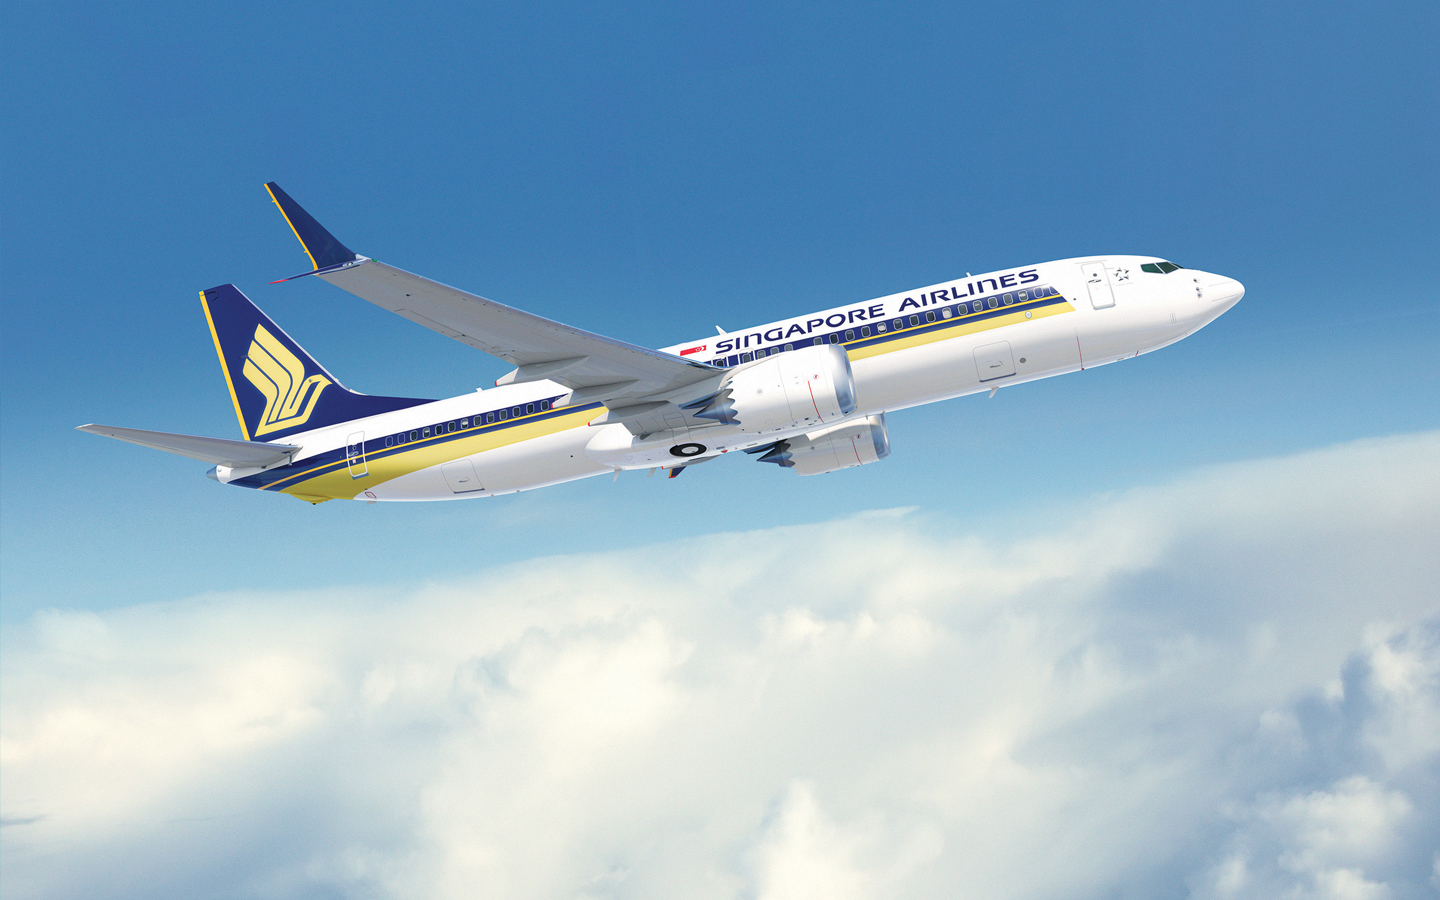 Singapore Airlines: Triumph in the skies